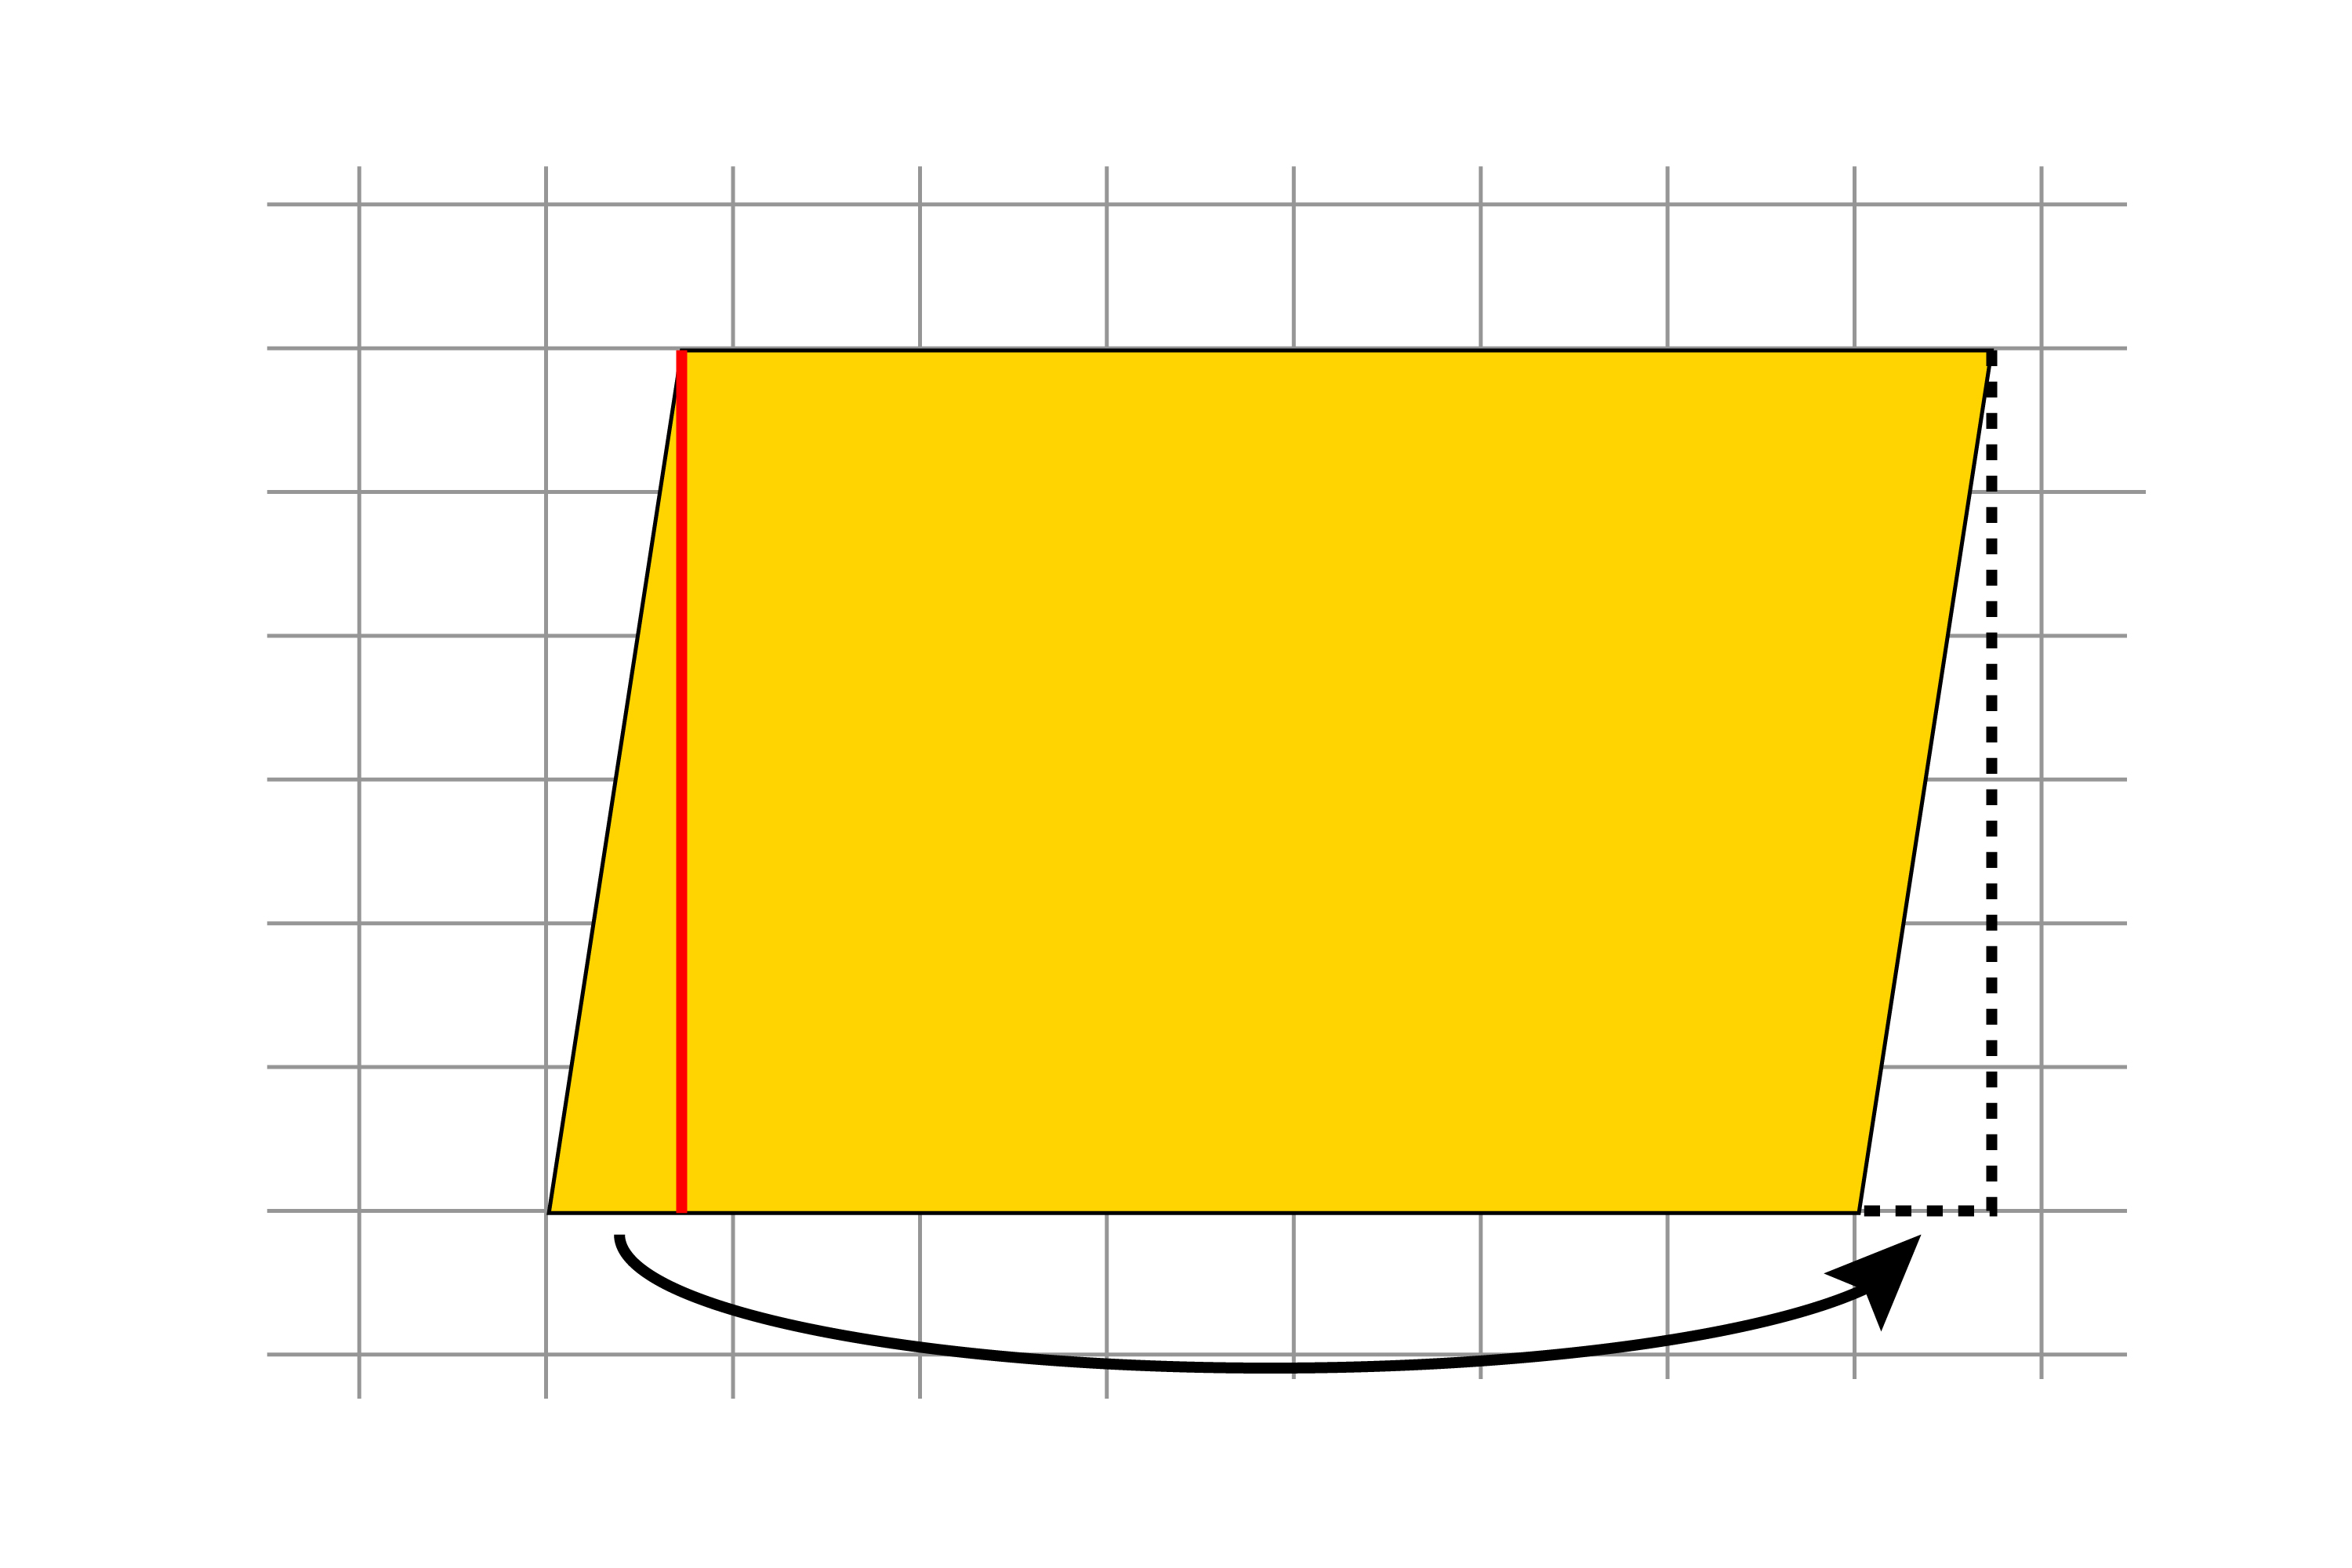 Redraw the parallelogram so it takes the shape of a rectangle